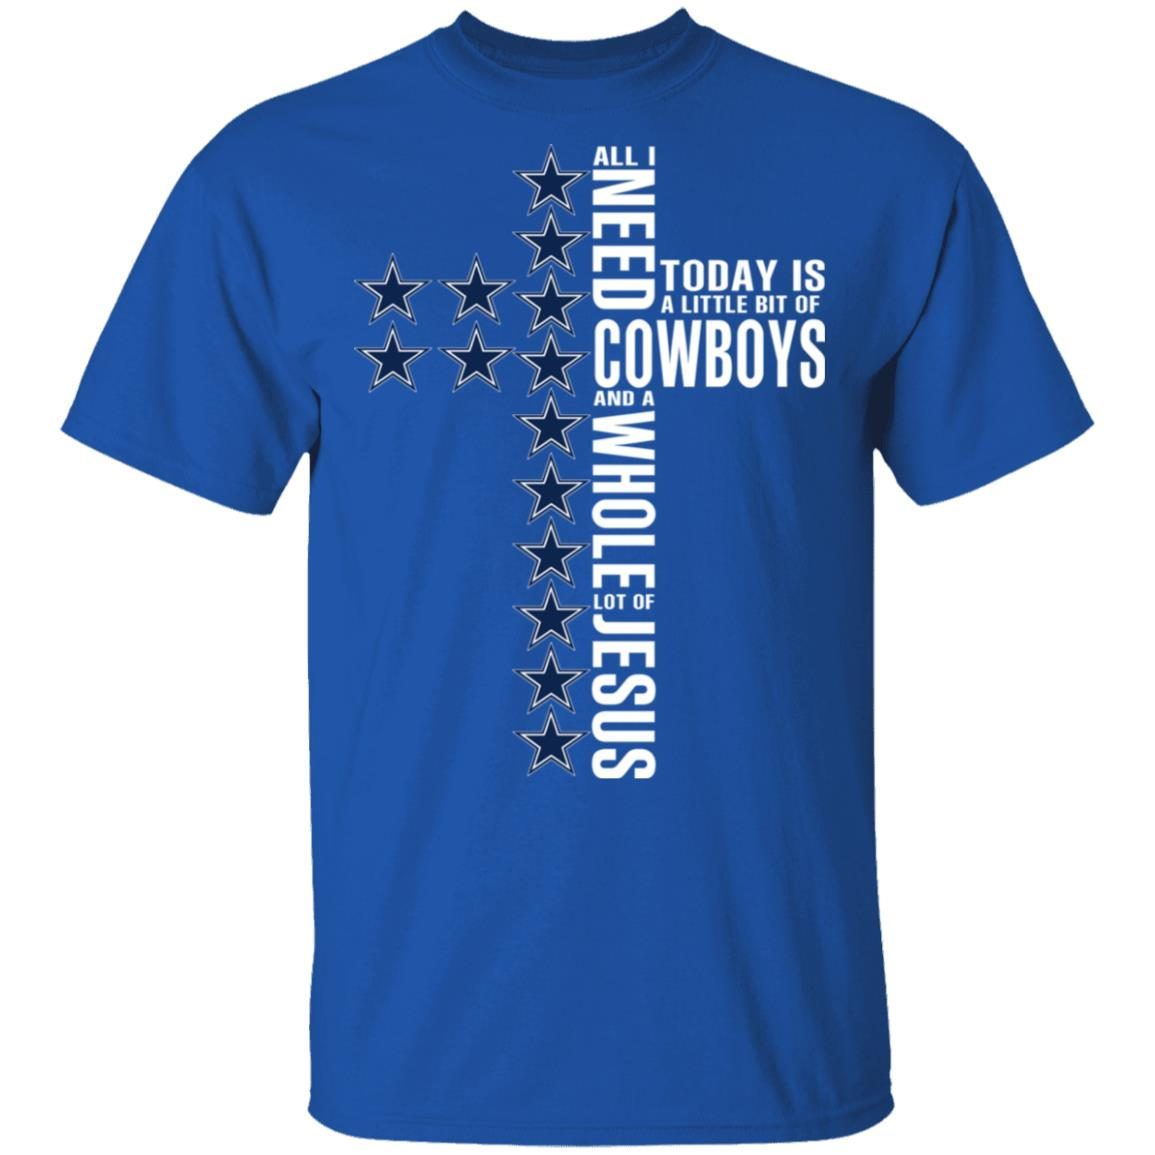 Jesus All I Need Is A Little Bit Of Dallas Cowboys And A Whole Lot Of Jesus shirt